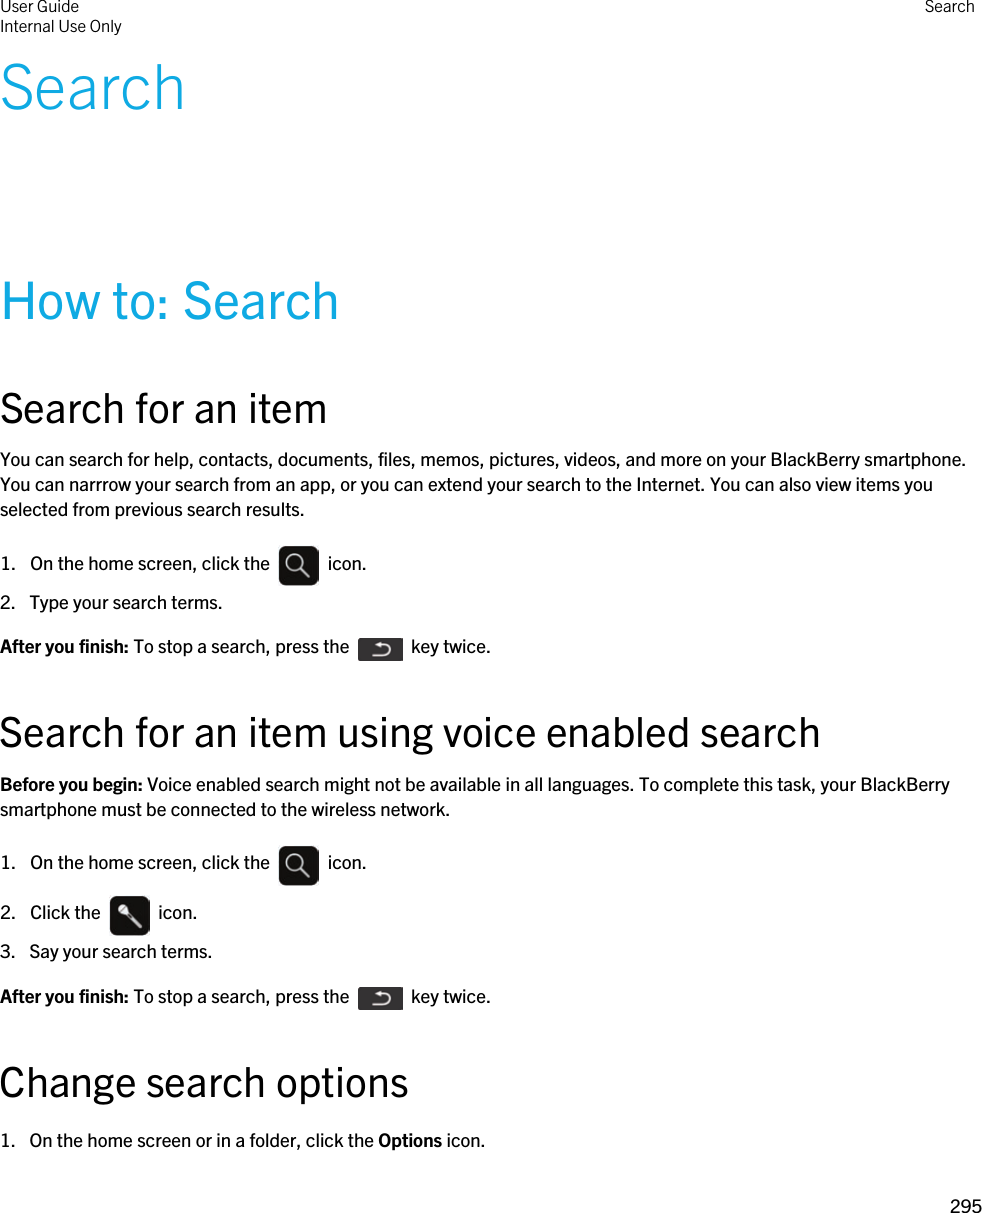 SearchHow to: SearchSearch for an itemYou can search for help, contacts, documents, files, memos, pictures, videos, and more on your BlackBerry smartphone. You can narrrow your search from an app, or you can extend your search to the Internet. You can also view items you selected from previous search results.1.  On the home screen, click the    icon. 2. Type your search terms.After you finish: To stop a search, press the    key twice.Search for an item using voice enabled searchBefore you begin: Voice enabled search might not be available in all languages. To complete this task, your BlackBerry smartphone must be connected to the wireless network.1.  On the home screen, click the    icon. 2.  Click the    icon. 3. Say your search terms.After you finish: To stop a search, press the    key twice.Change search options1. On the home screen or in a folder, click the Options icon.User GuideInternal Use Only Search295 